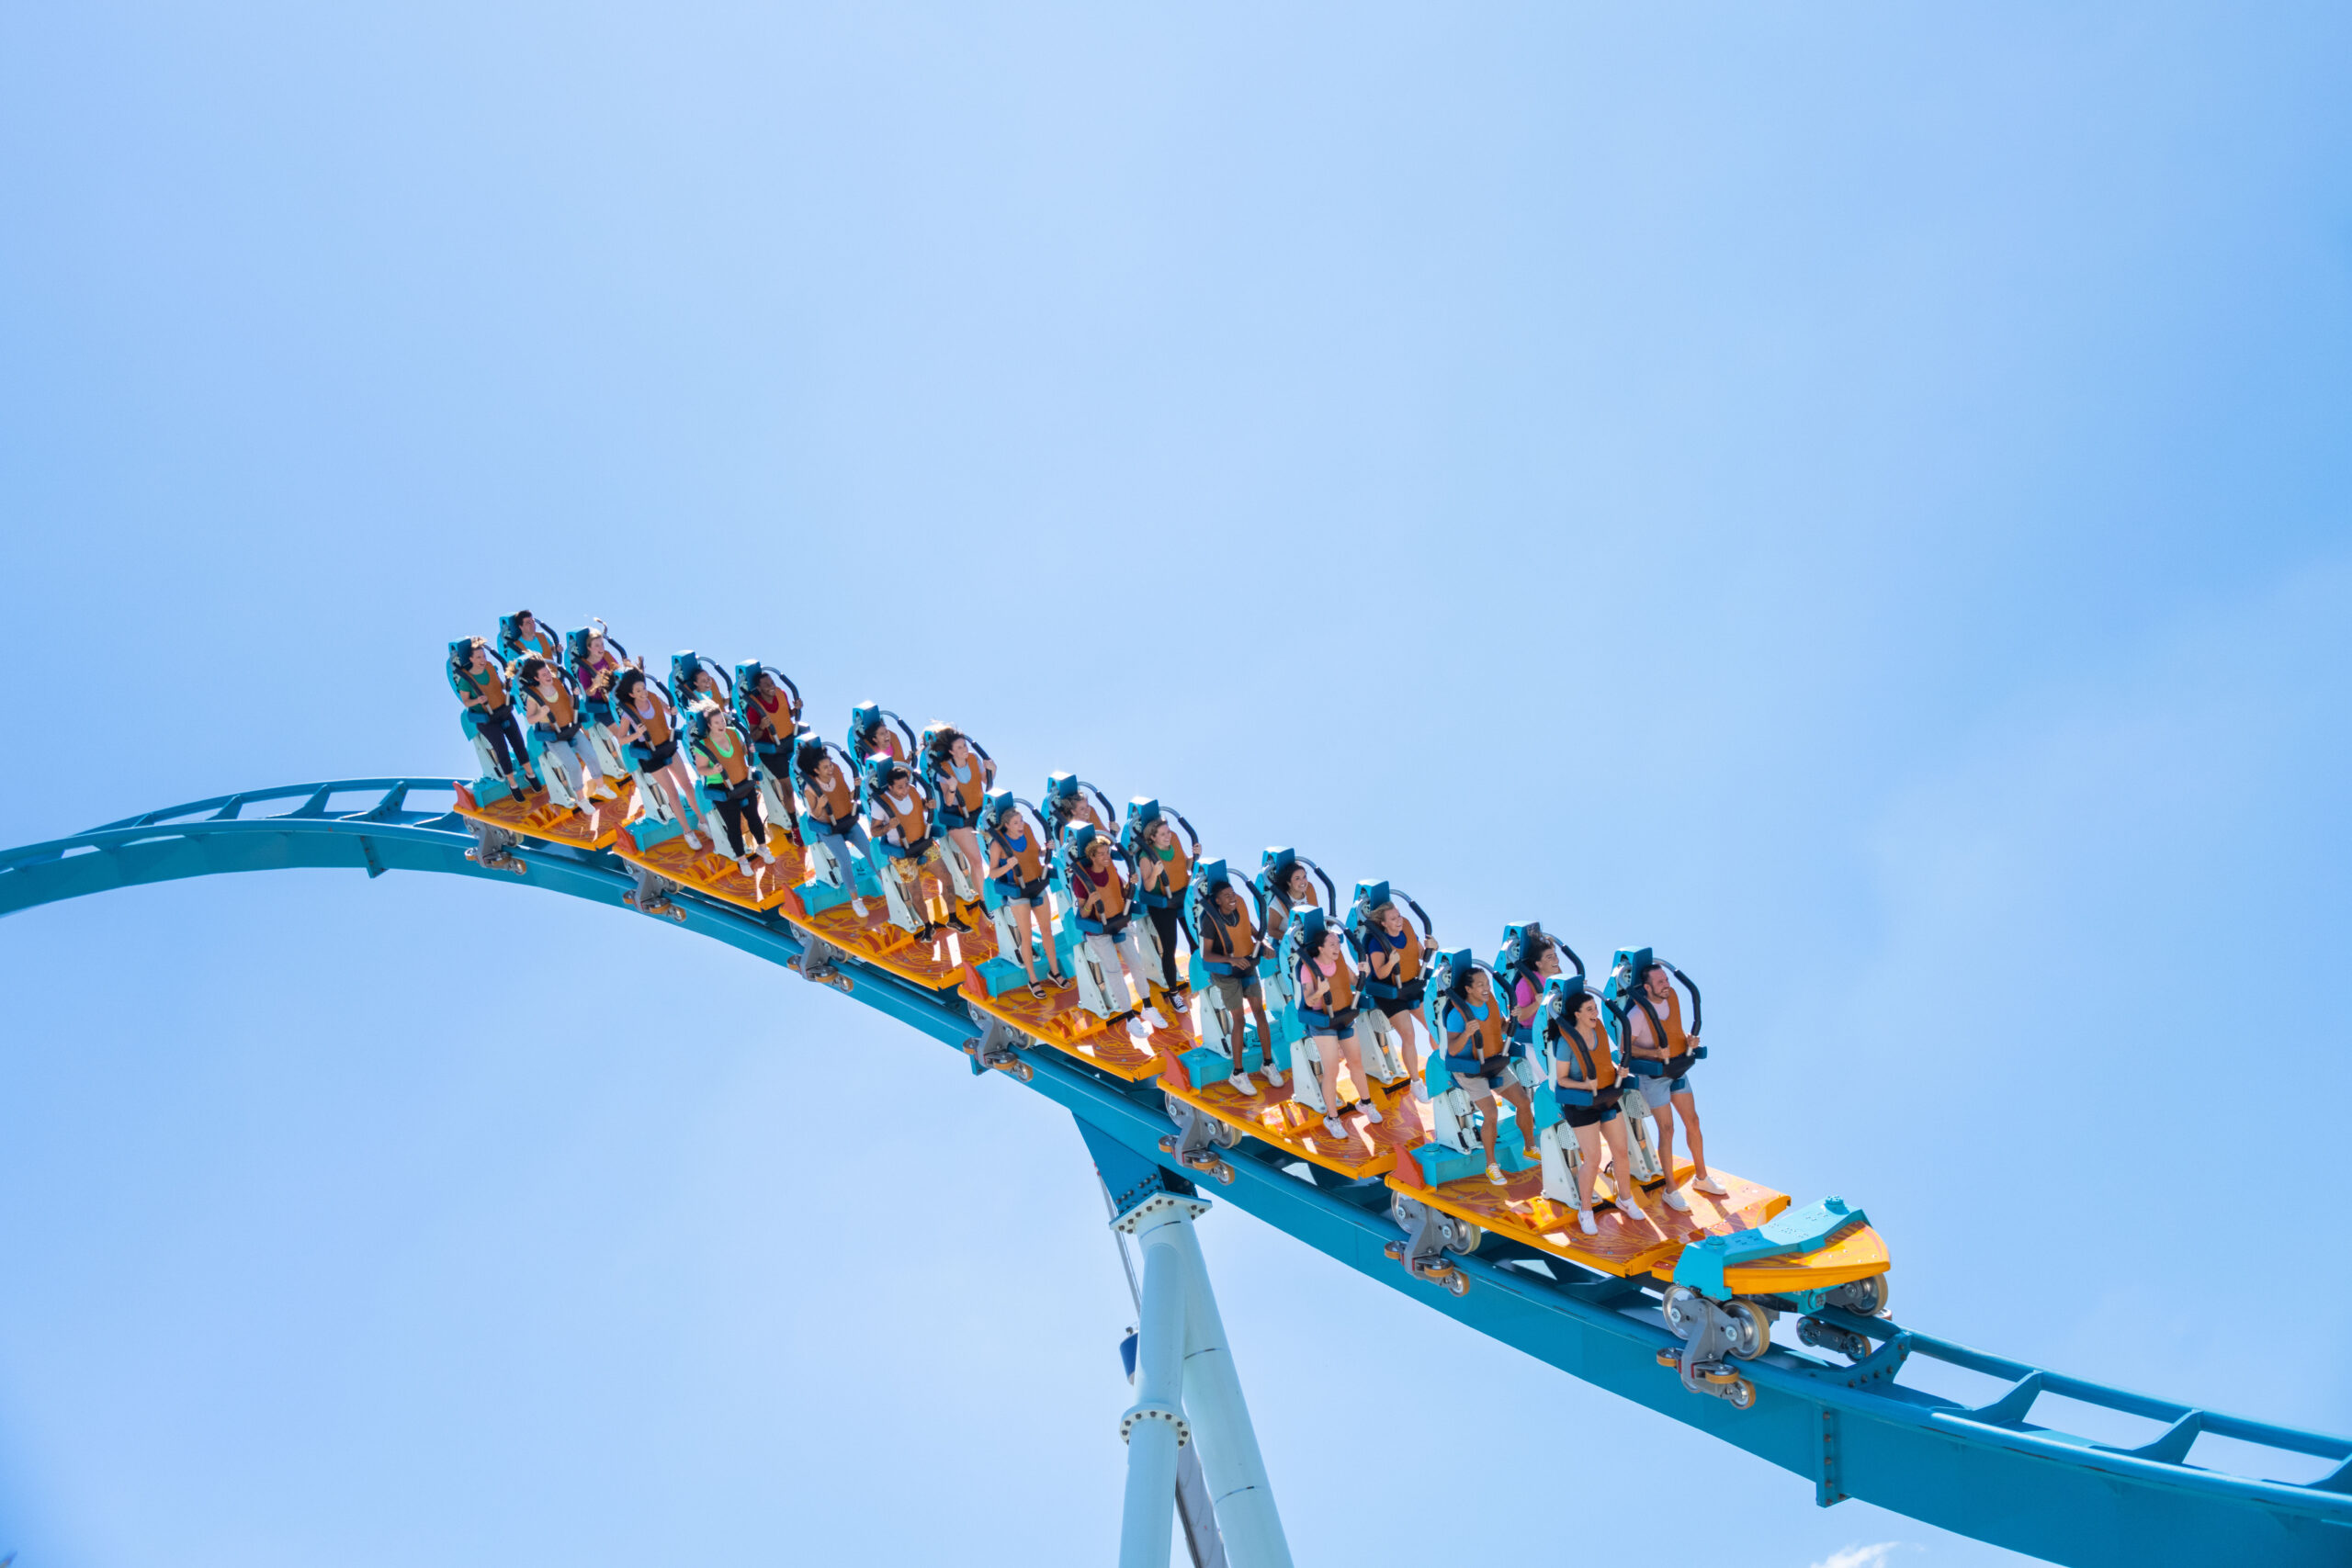 Pipeline: The Surf Coaster Now Open at SeaWorld - Florida Parks